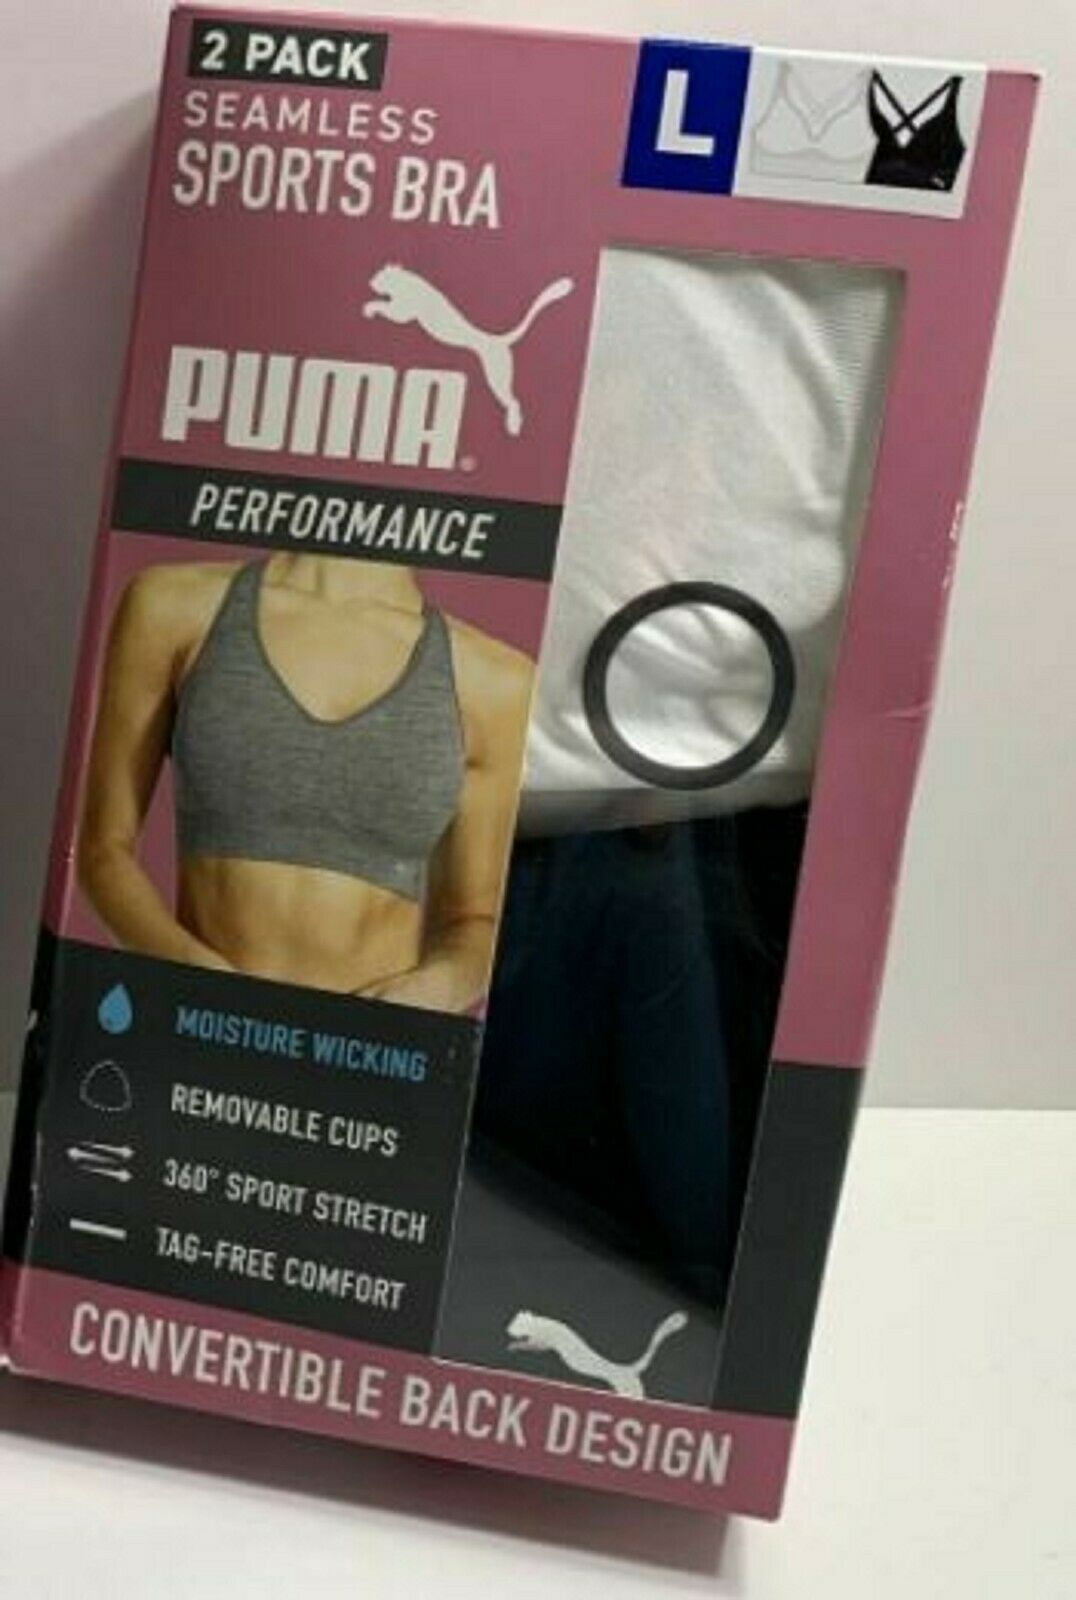 Puma Sports Bra 2 Pack  Moisture Wicking, Removable Cups, Tag